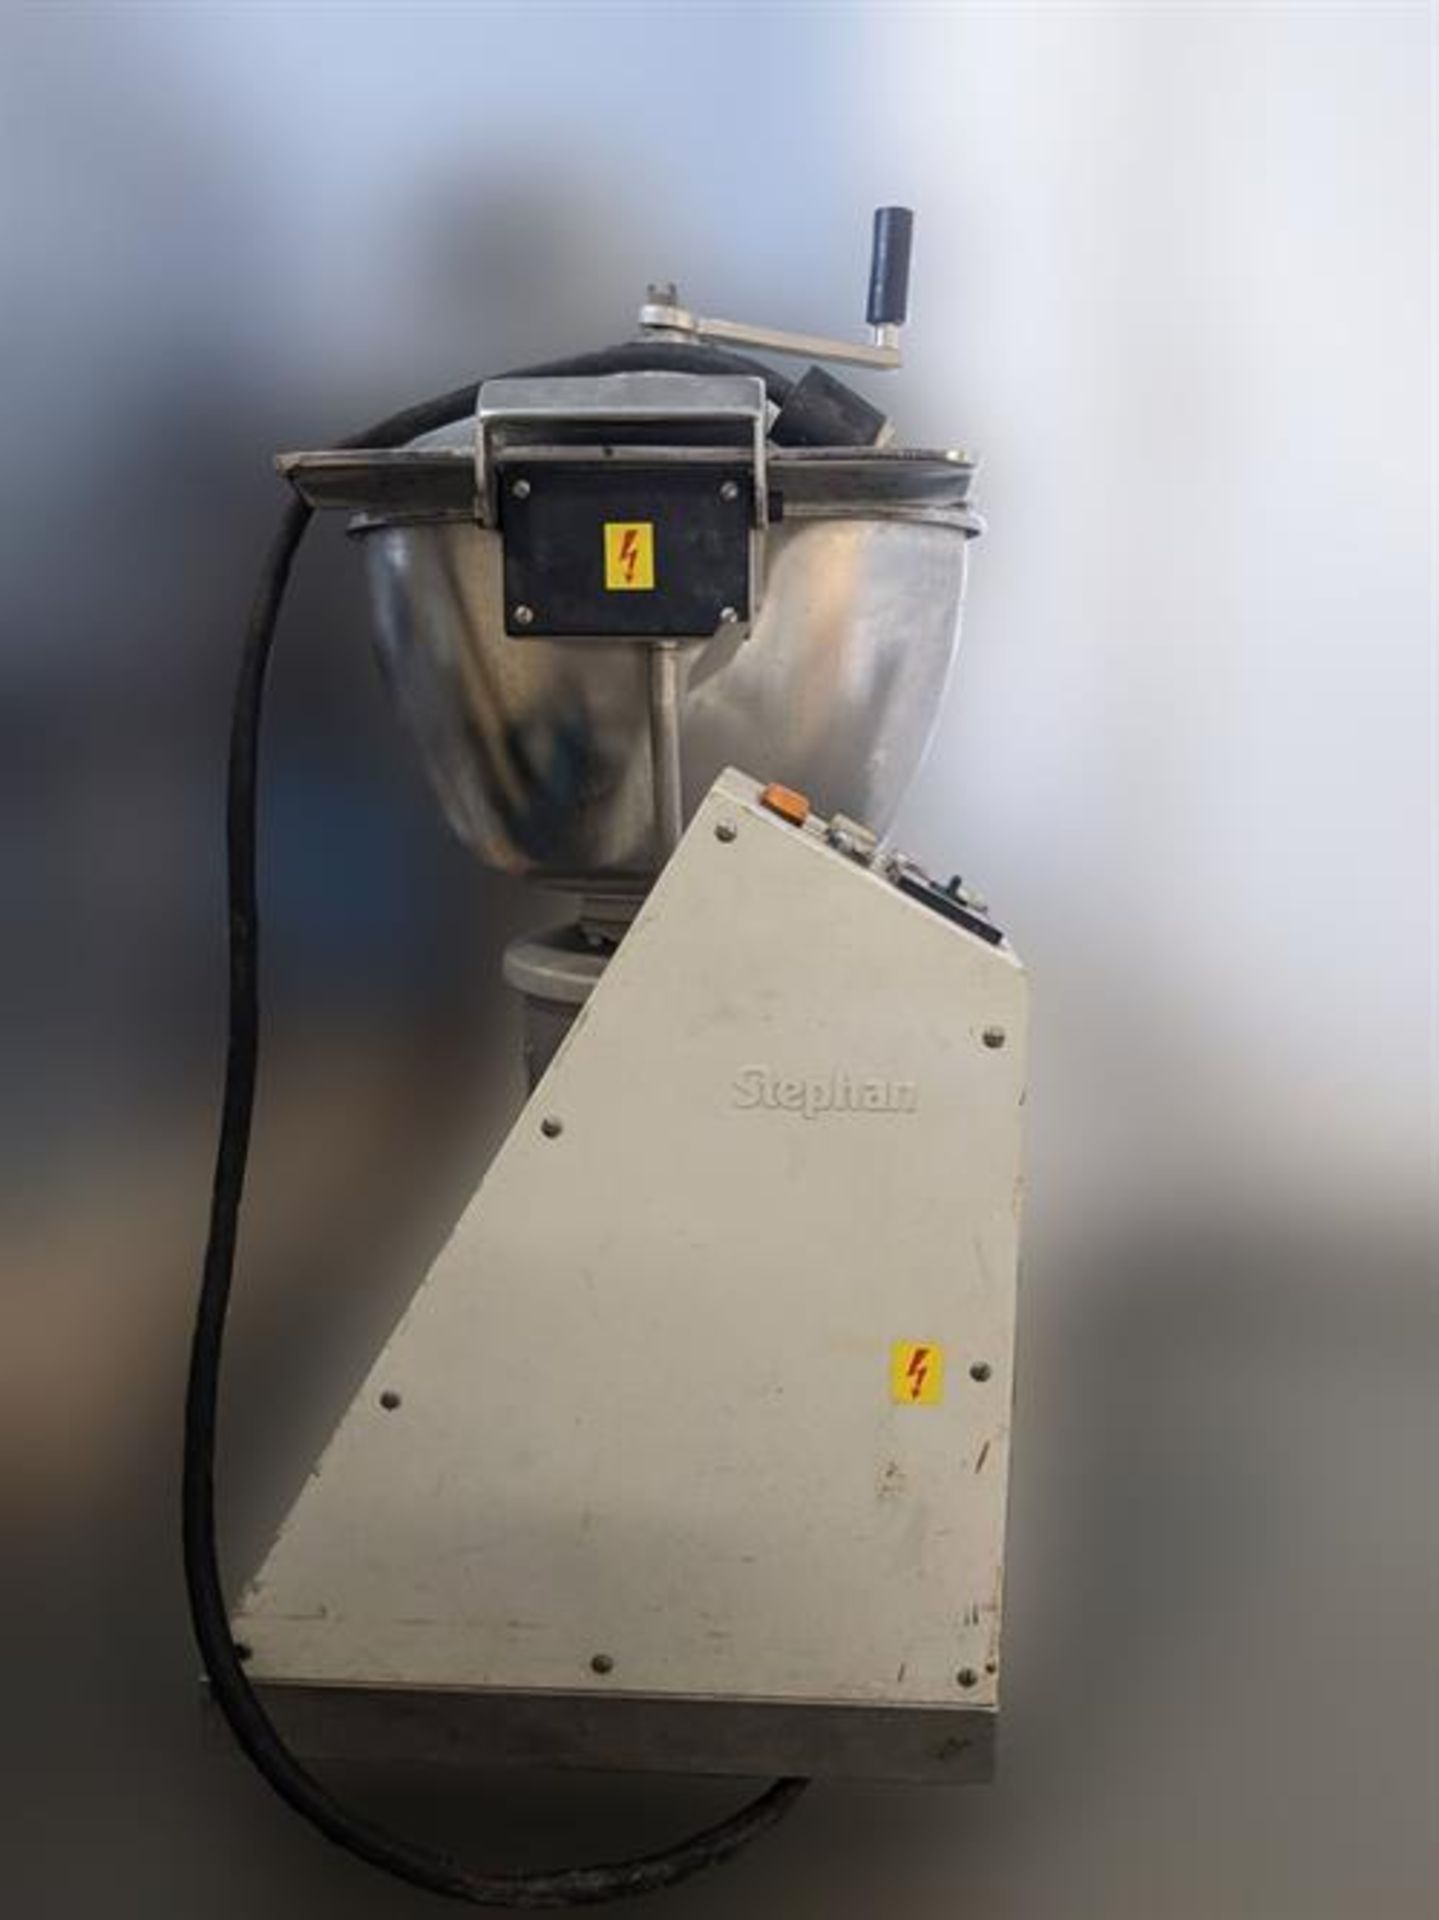 Stephan Model VCM44A Cutter Mixer - Model VCM44A - Serial number 716.097.04 - 44 liter capacity - - Image 6 of 9